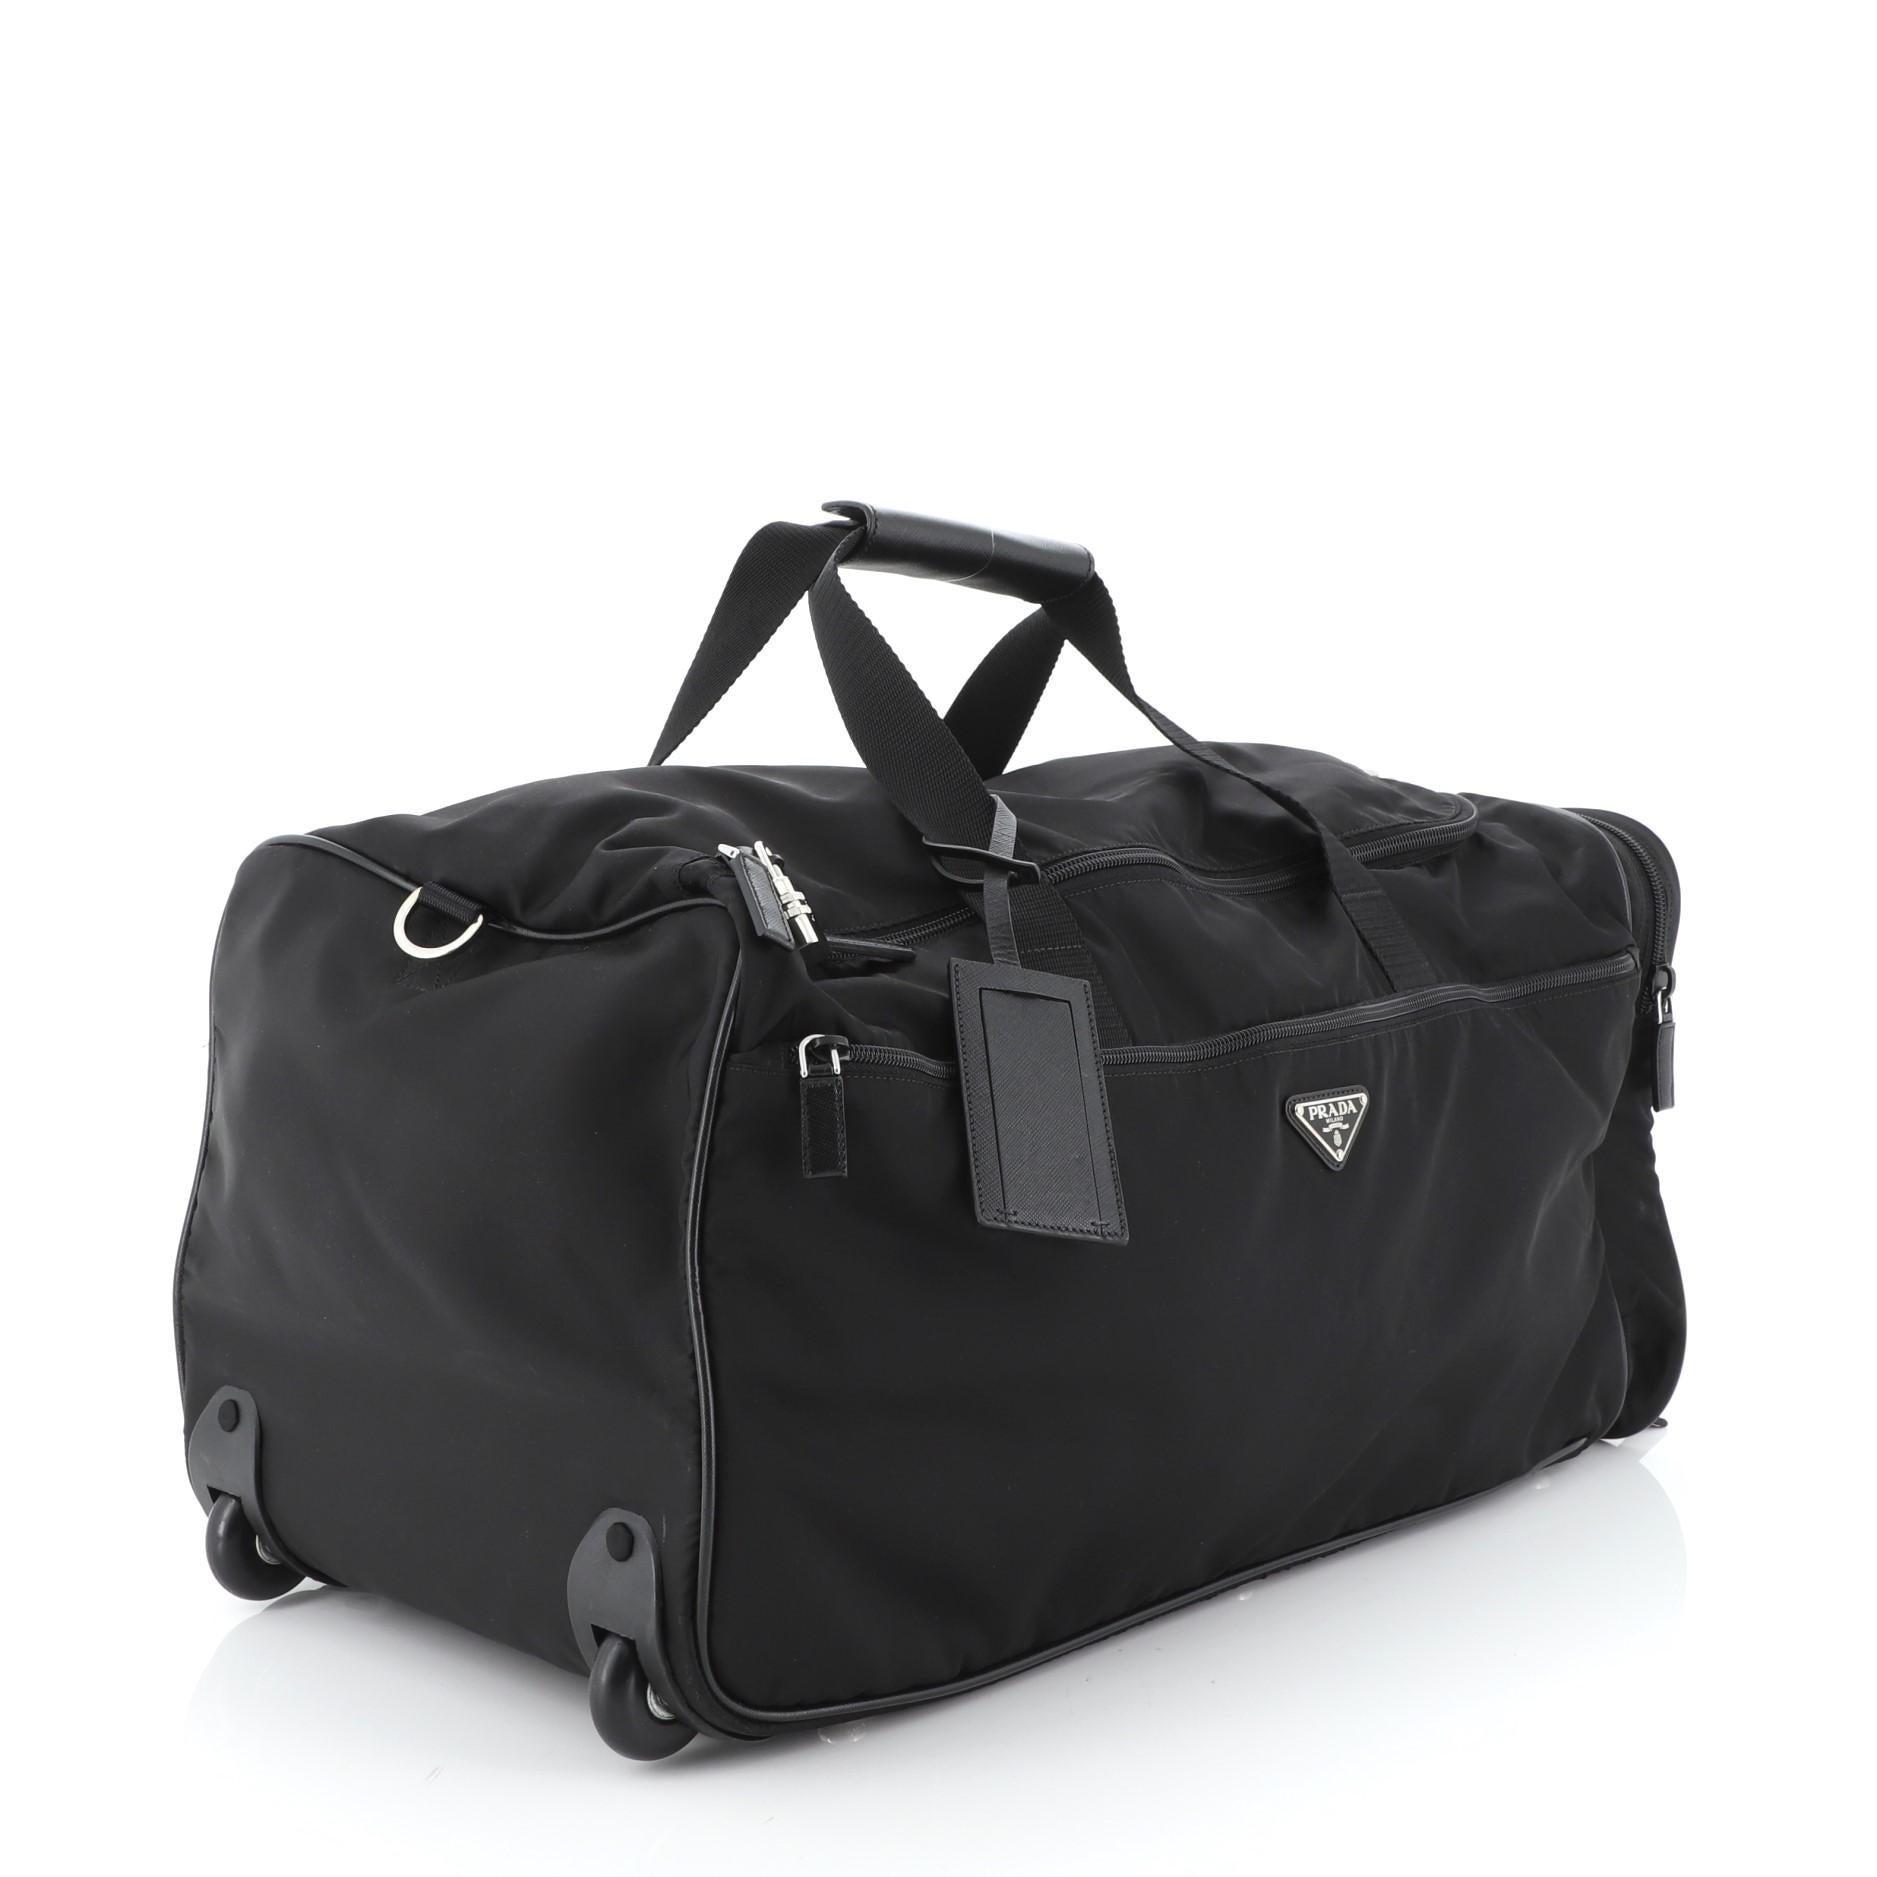 This Prada Boston Trolley Tessuto Large, crafted in black nylon, features a retractable handle, carrying handles, signature inverted triangle Prada logo, exterior zip pockets, two wheels and silver-tone hardware. Its all-around zip closure opens to